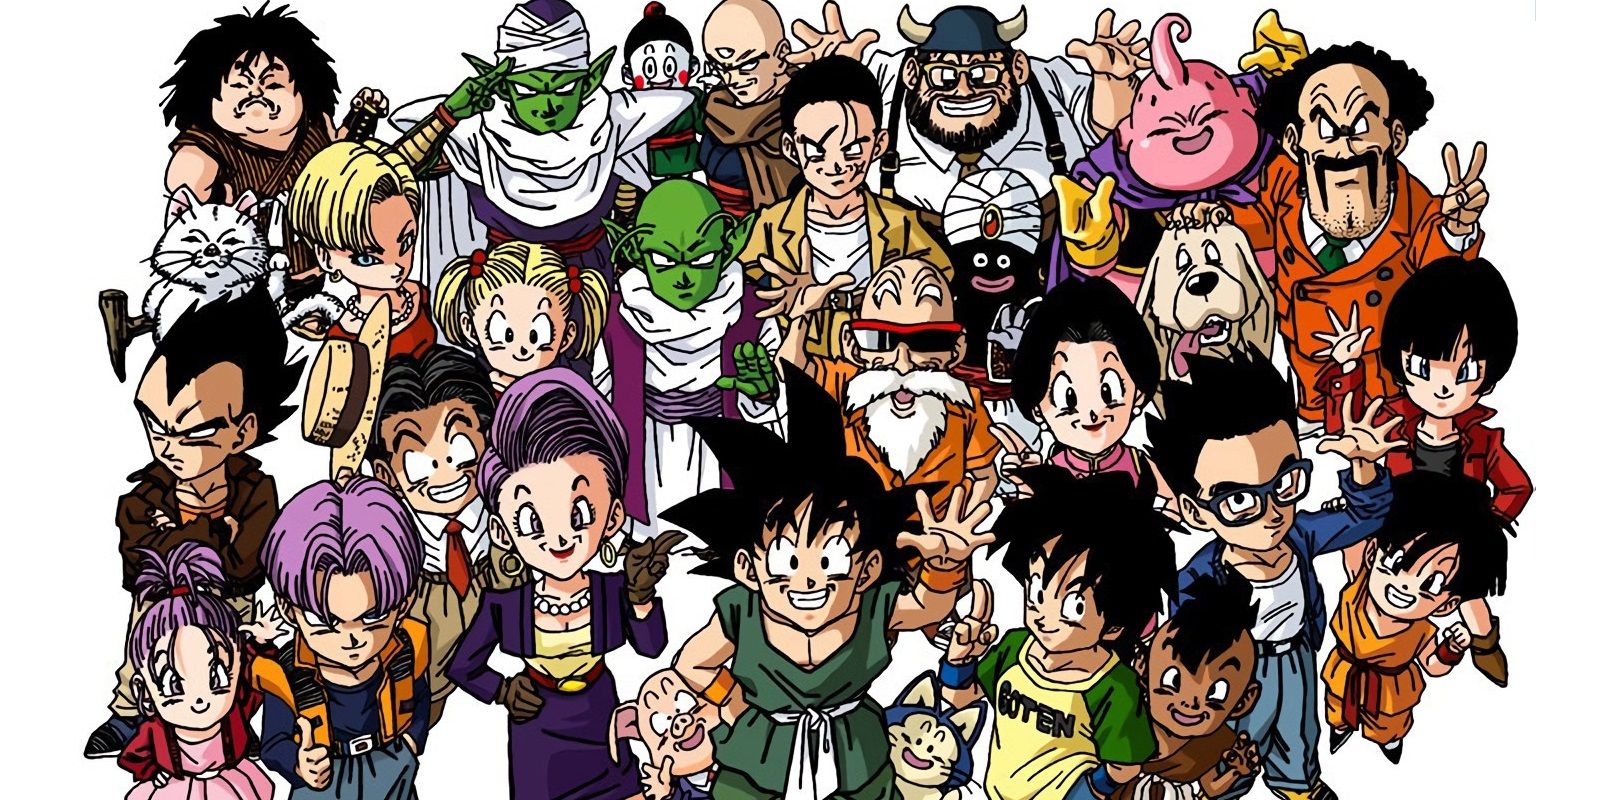 Will Dragon Ball Super reach to EoZ (Goku met Uub) and Continue story after  that ?